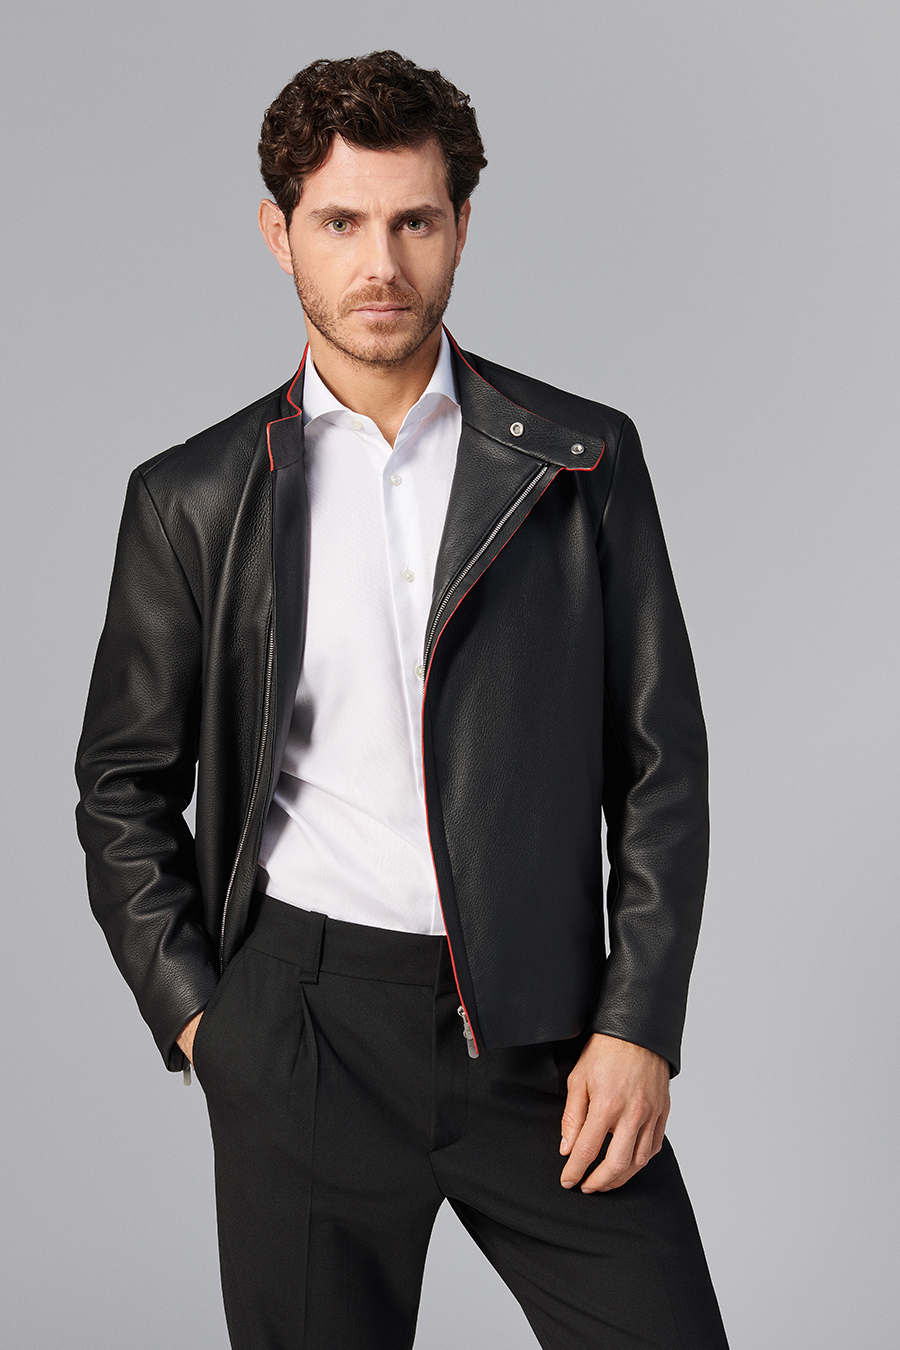 F collection Ferrari jacket automatic! - clothing & accessories